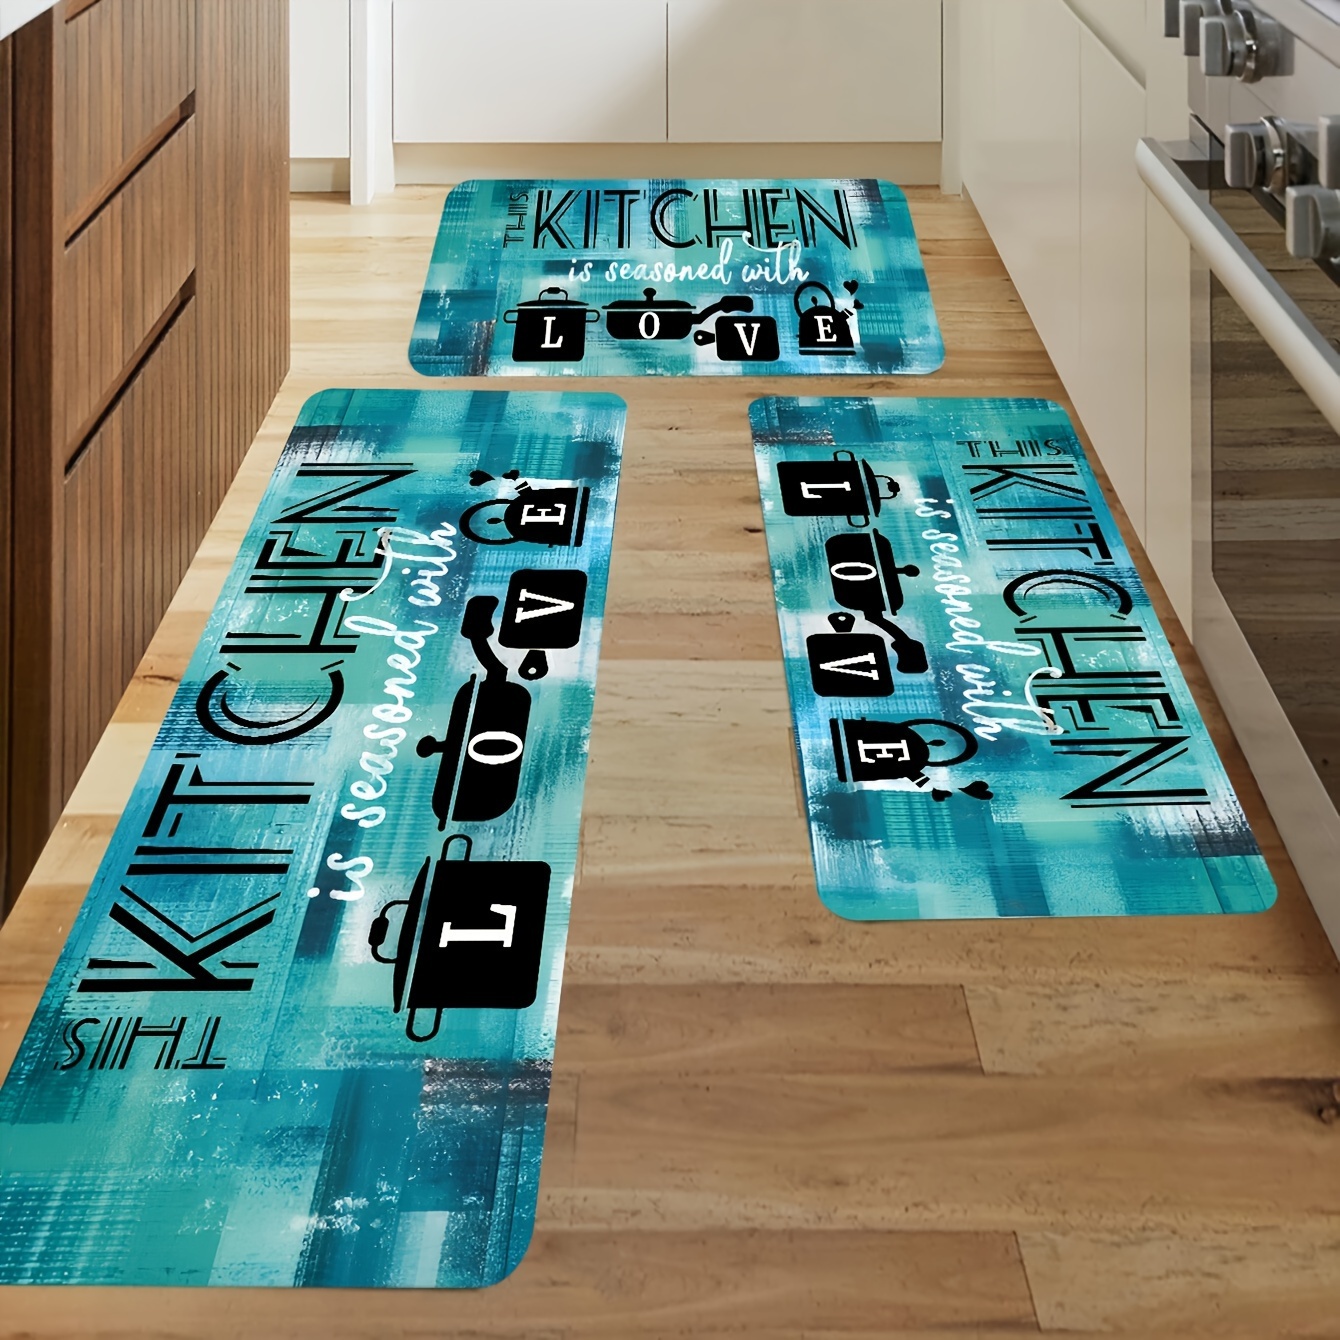 

Kitchen Rugs Set Of 3, Seasoned With Love Design, Non-slip Absorbent Polyester Mats For Home - Machine Washable, Rectangular, Multi-size Combo Pack (40x60cm, 50x80cm, 40x120cm)